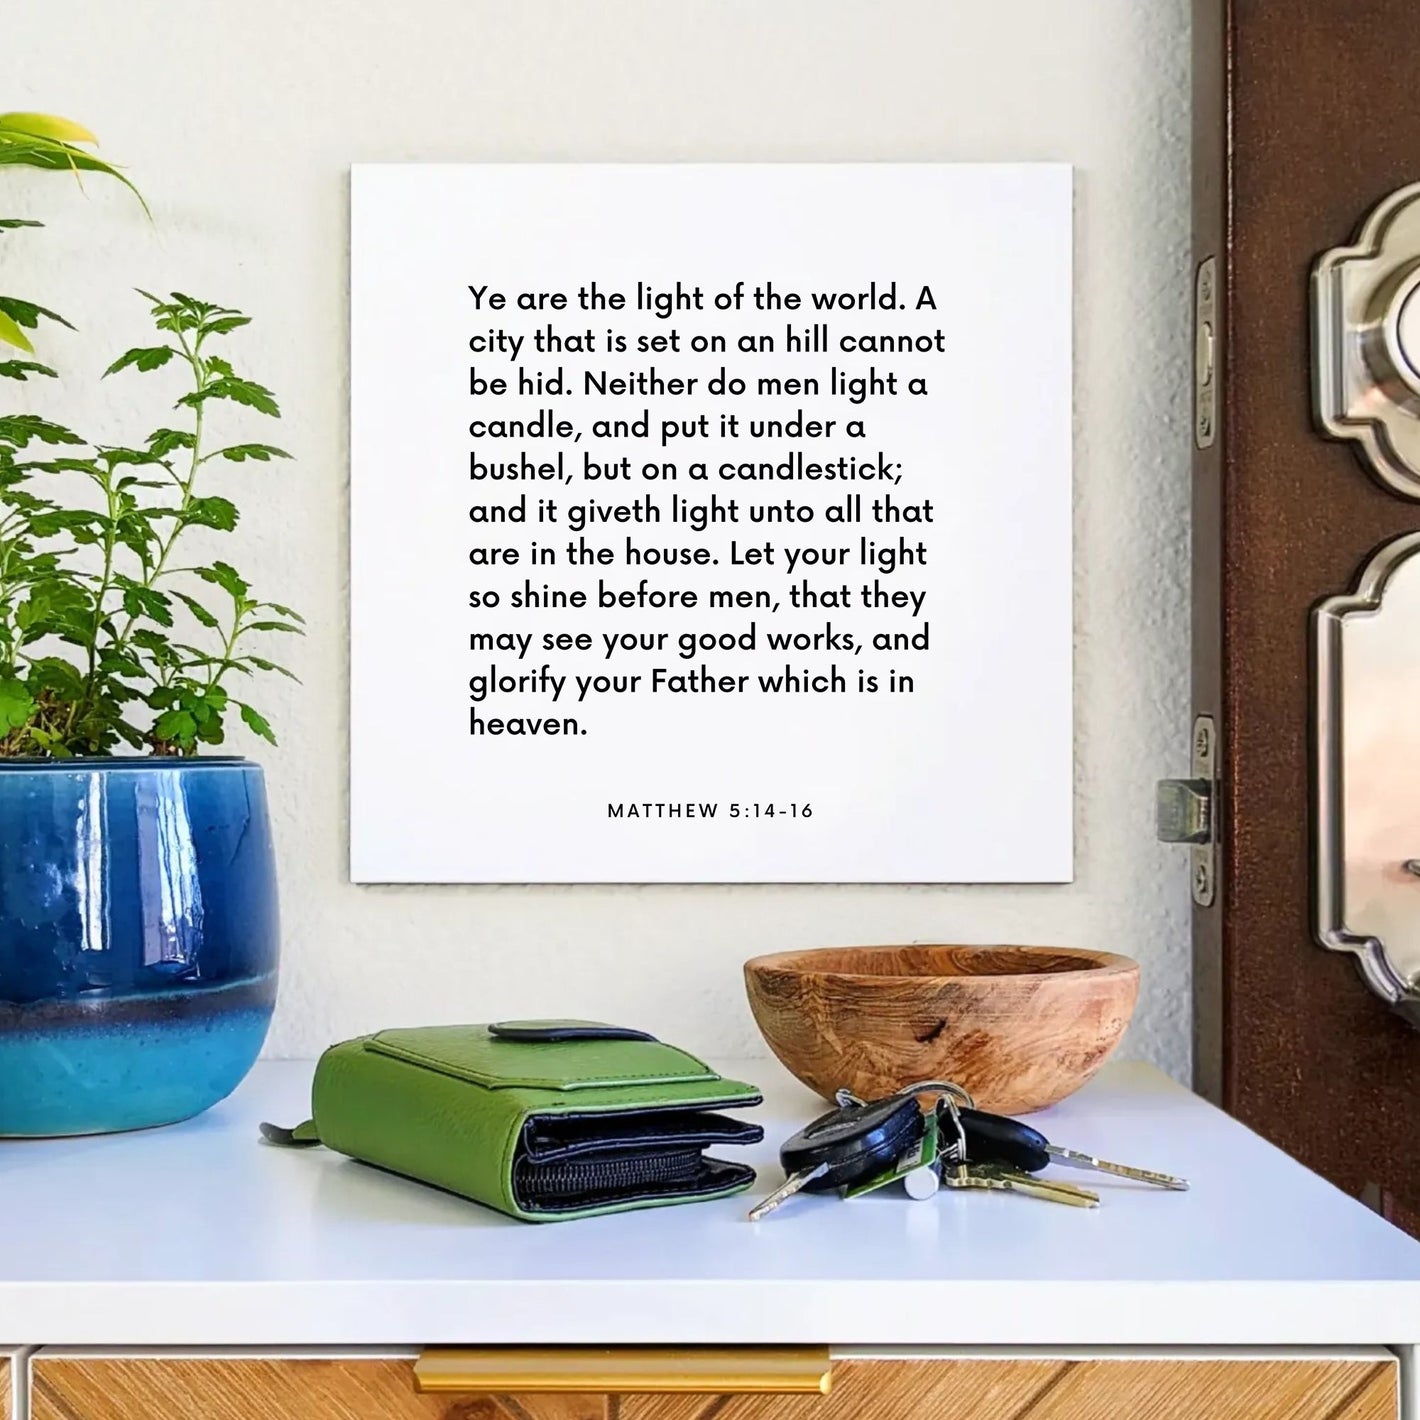 Entryway mouting of the scripture tile for Matthew 5:14-16 - "Ye are the light of the world"